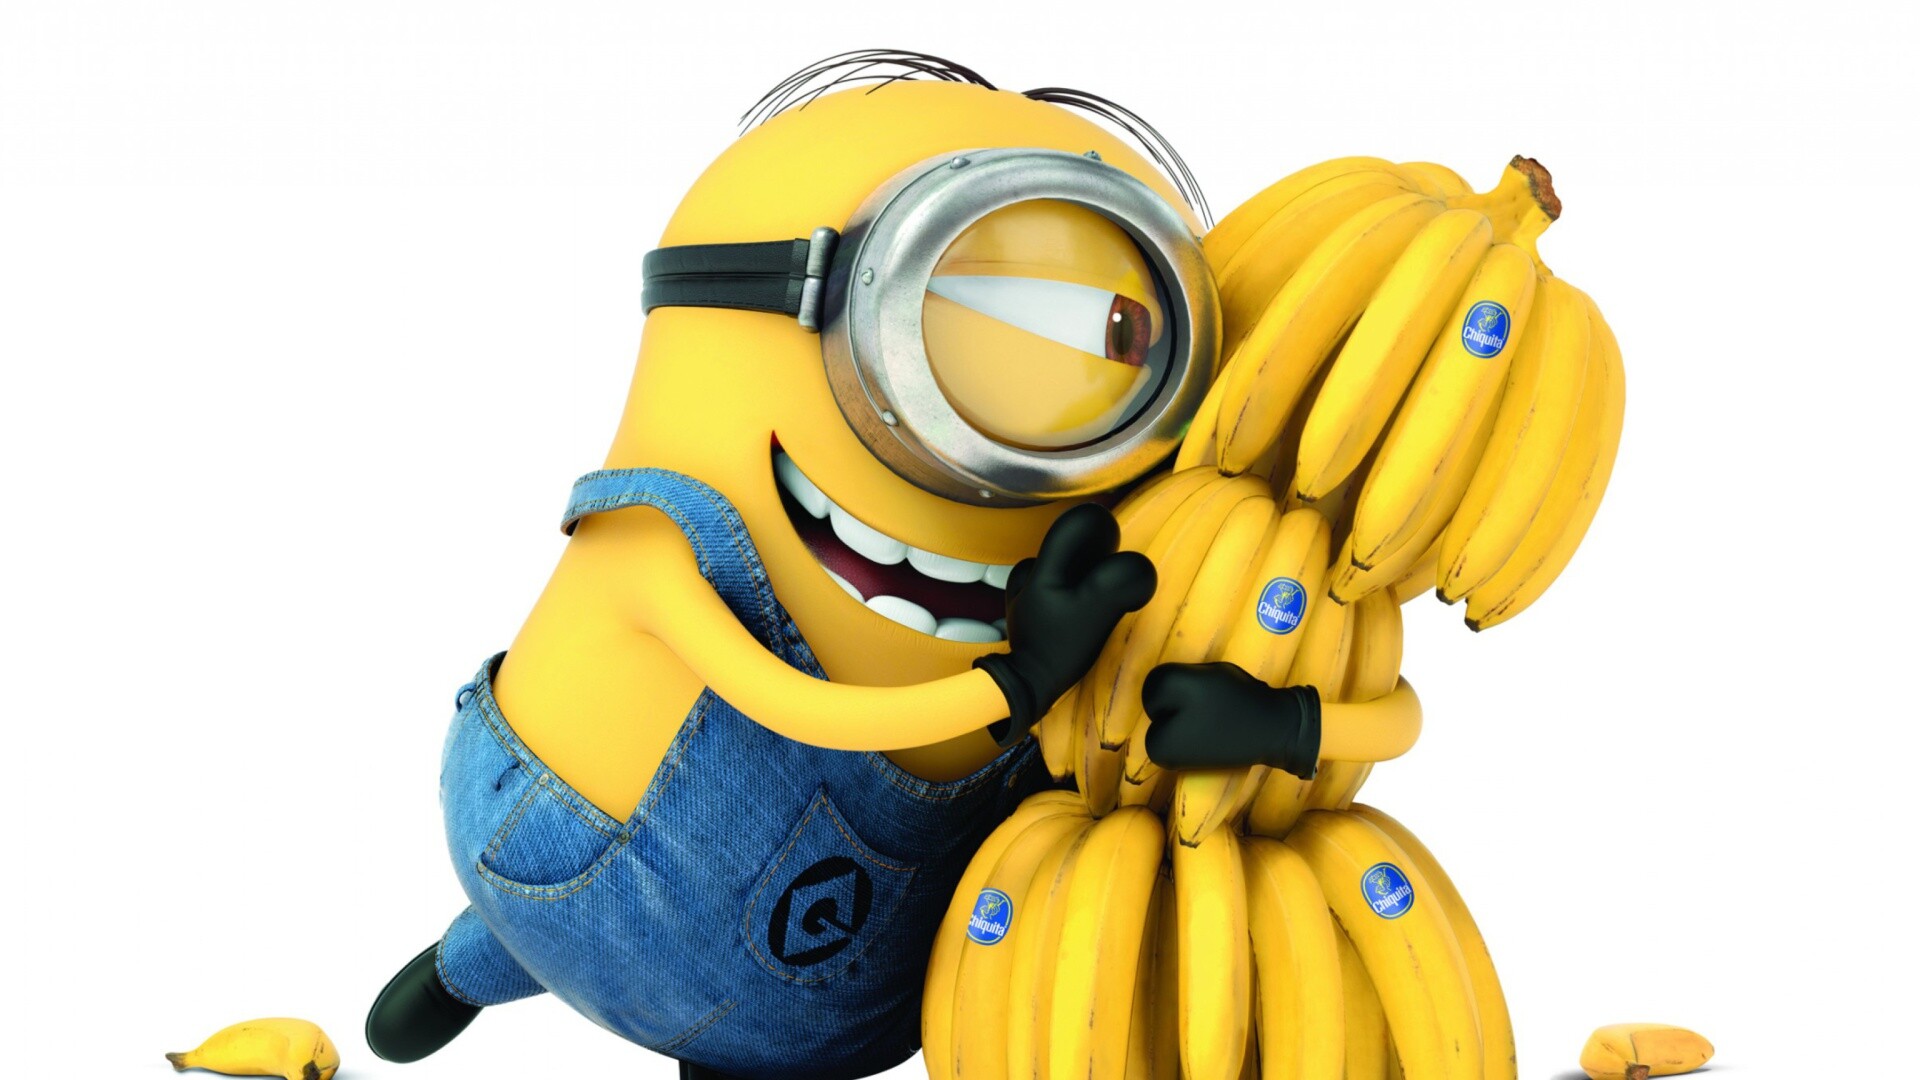 Despicable Me: Minion and banana, A computer-animated media franchise centering on Gru. 1920x1080 Full HD Wallpaper.